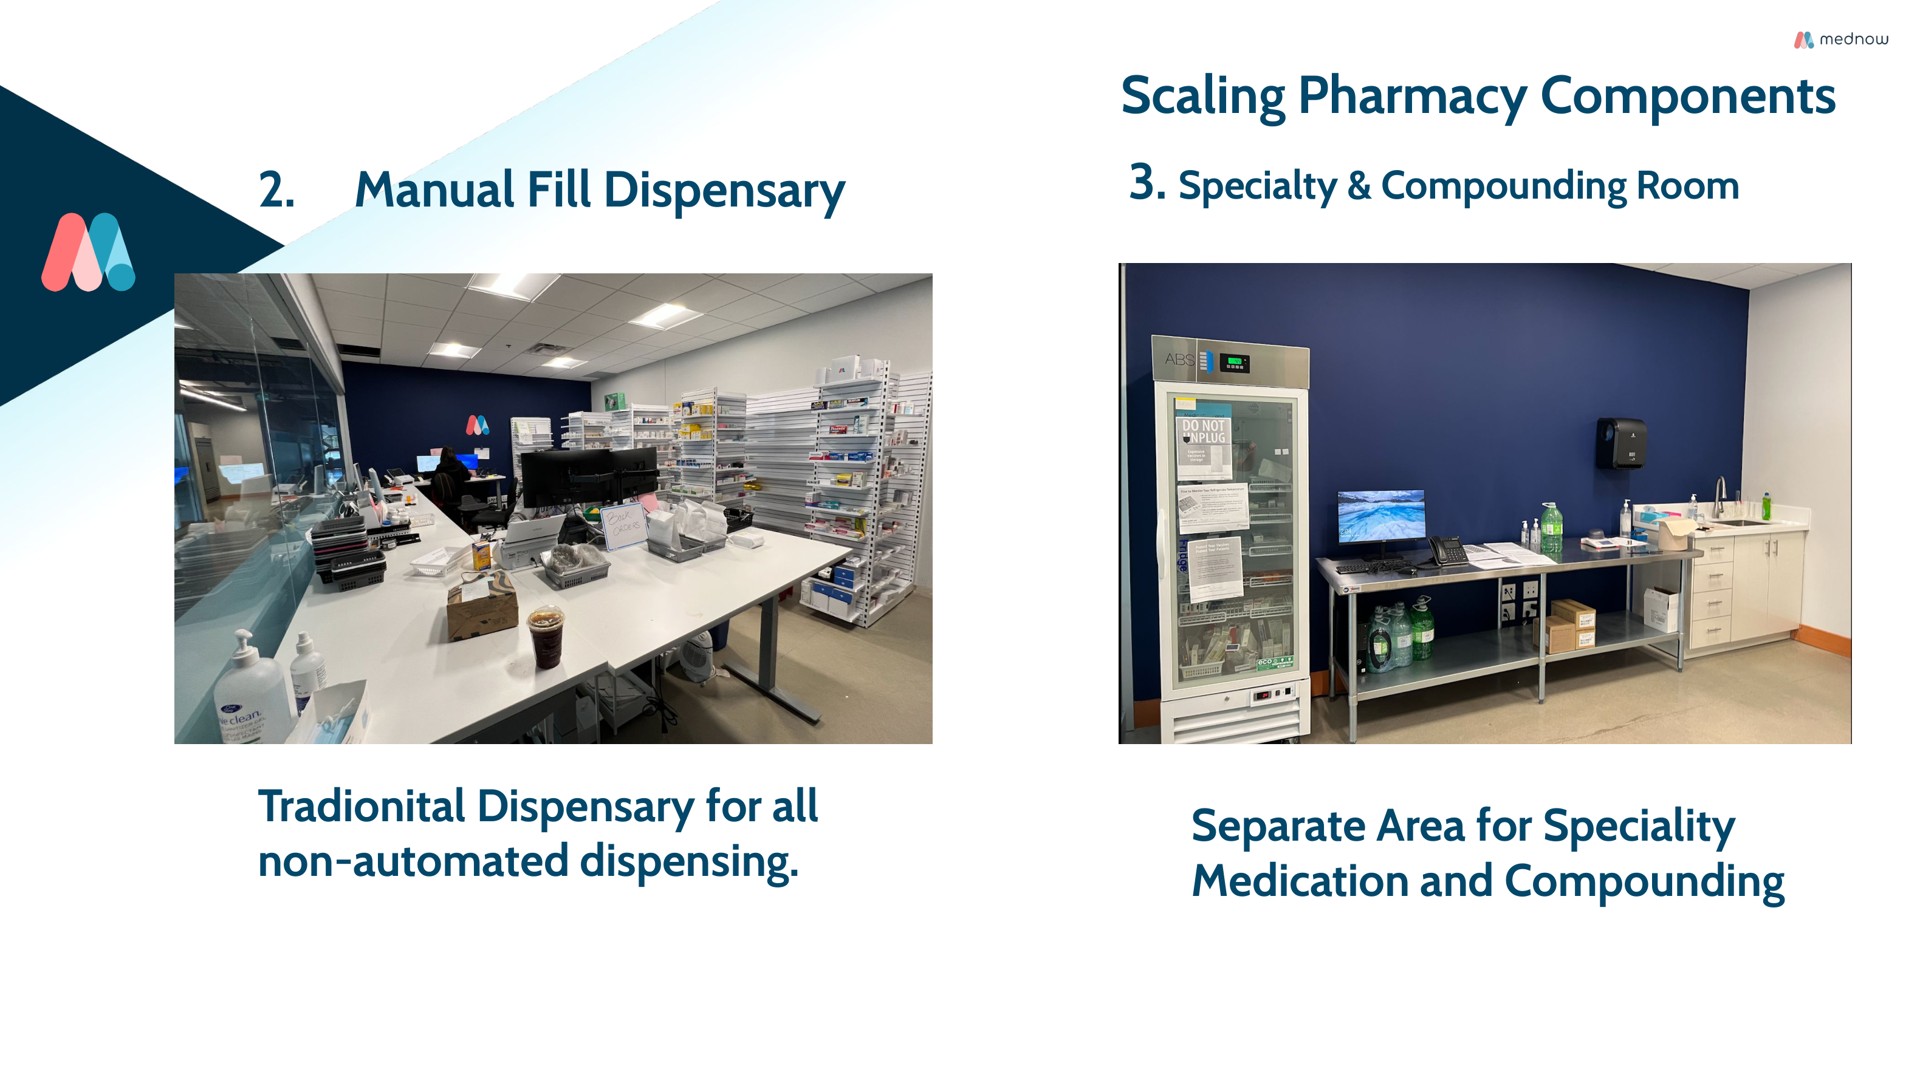 manual fill dispensary scaling pharmacy components separate area for | Mednow